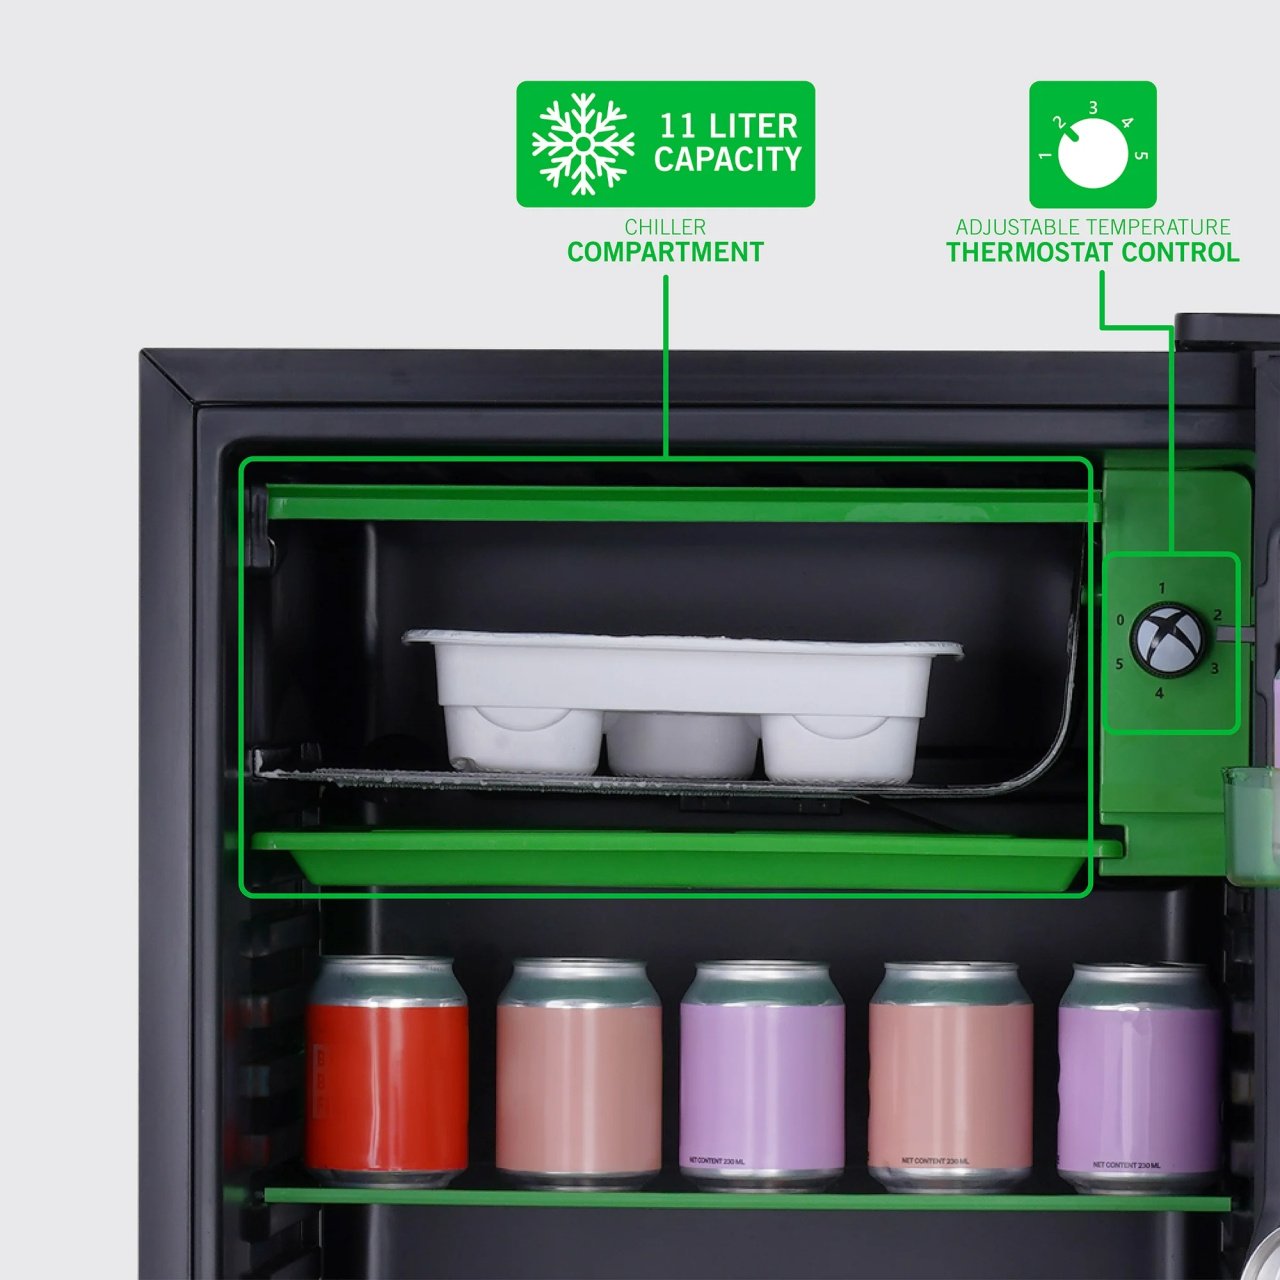 Xbox Has Created Another New Mini Fridge, And It's Easily The Biggest Yet